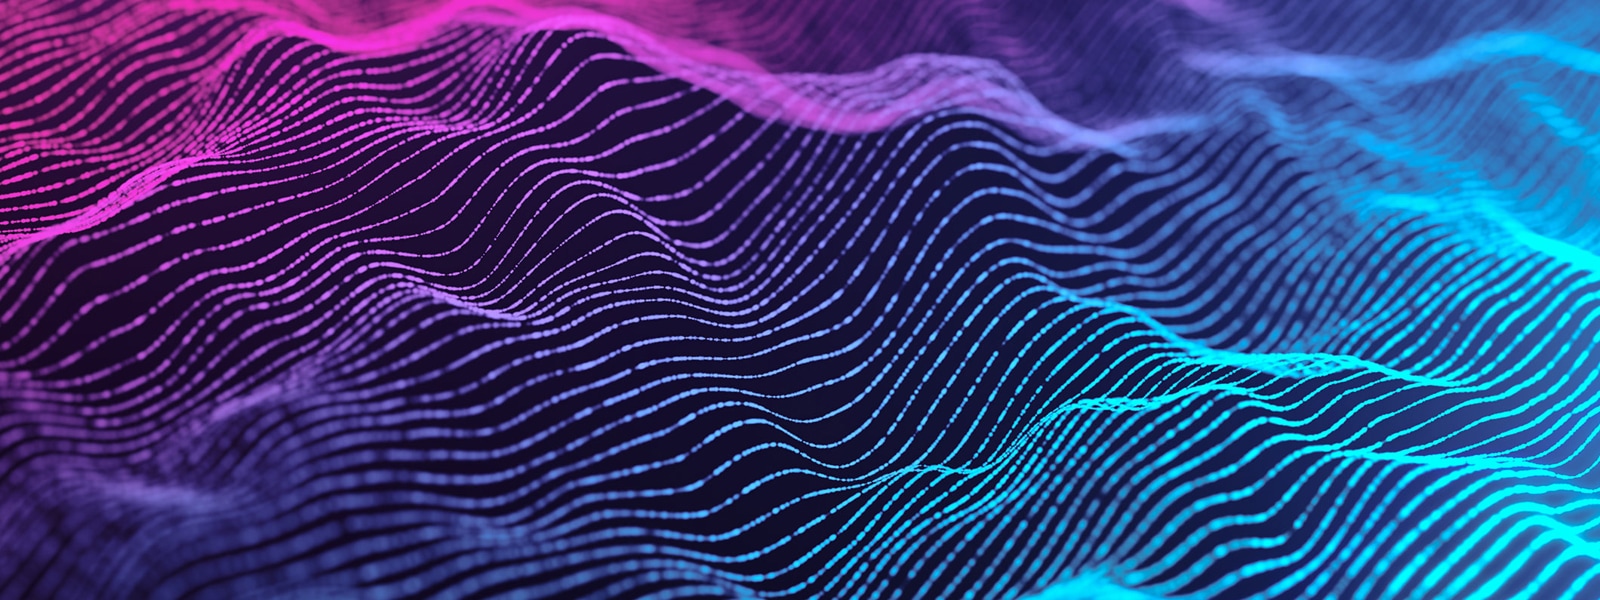 Abstract blue and purple texture of sound waves